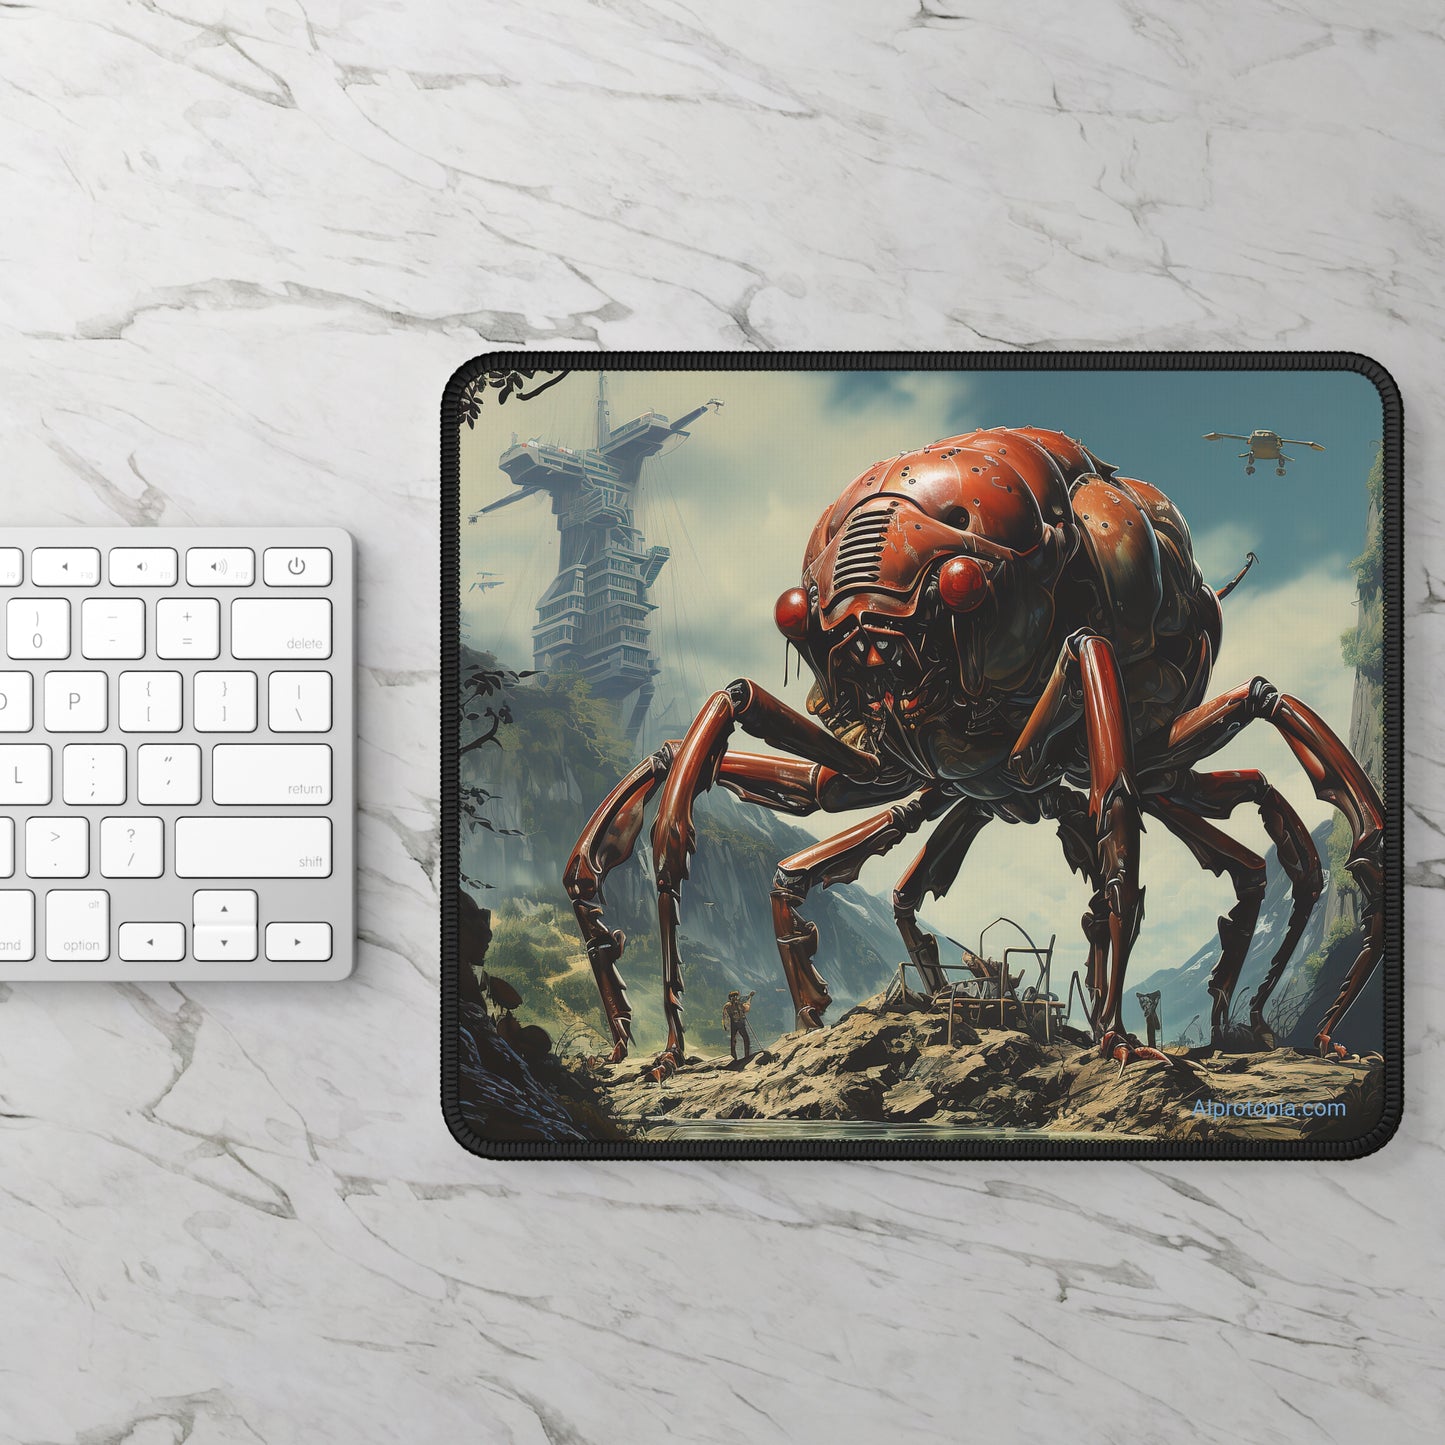 Gaming Mouse Pad. 1950's Pulp Sci-Fi Alien.